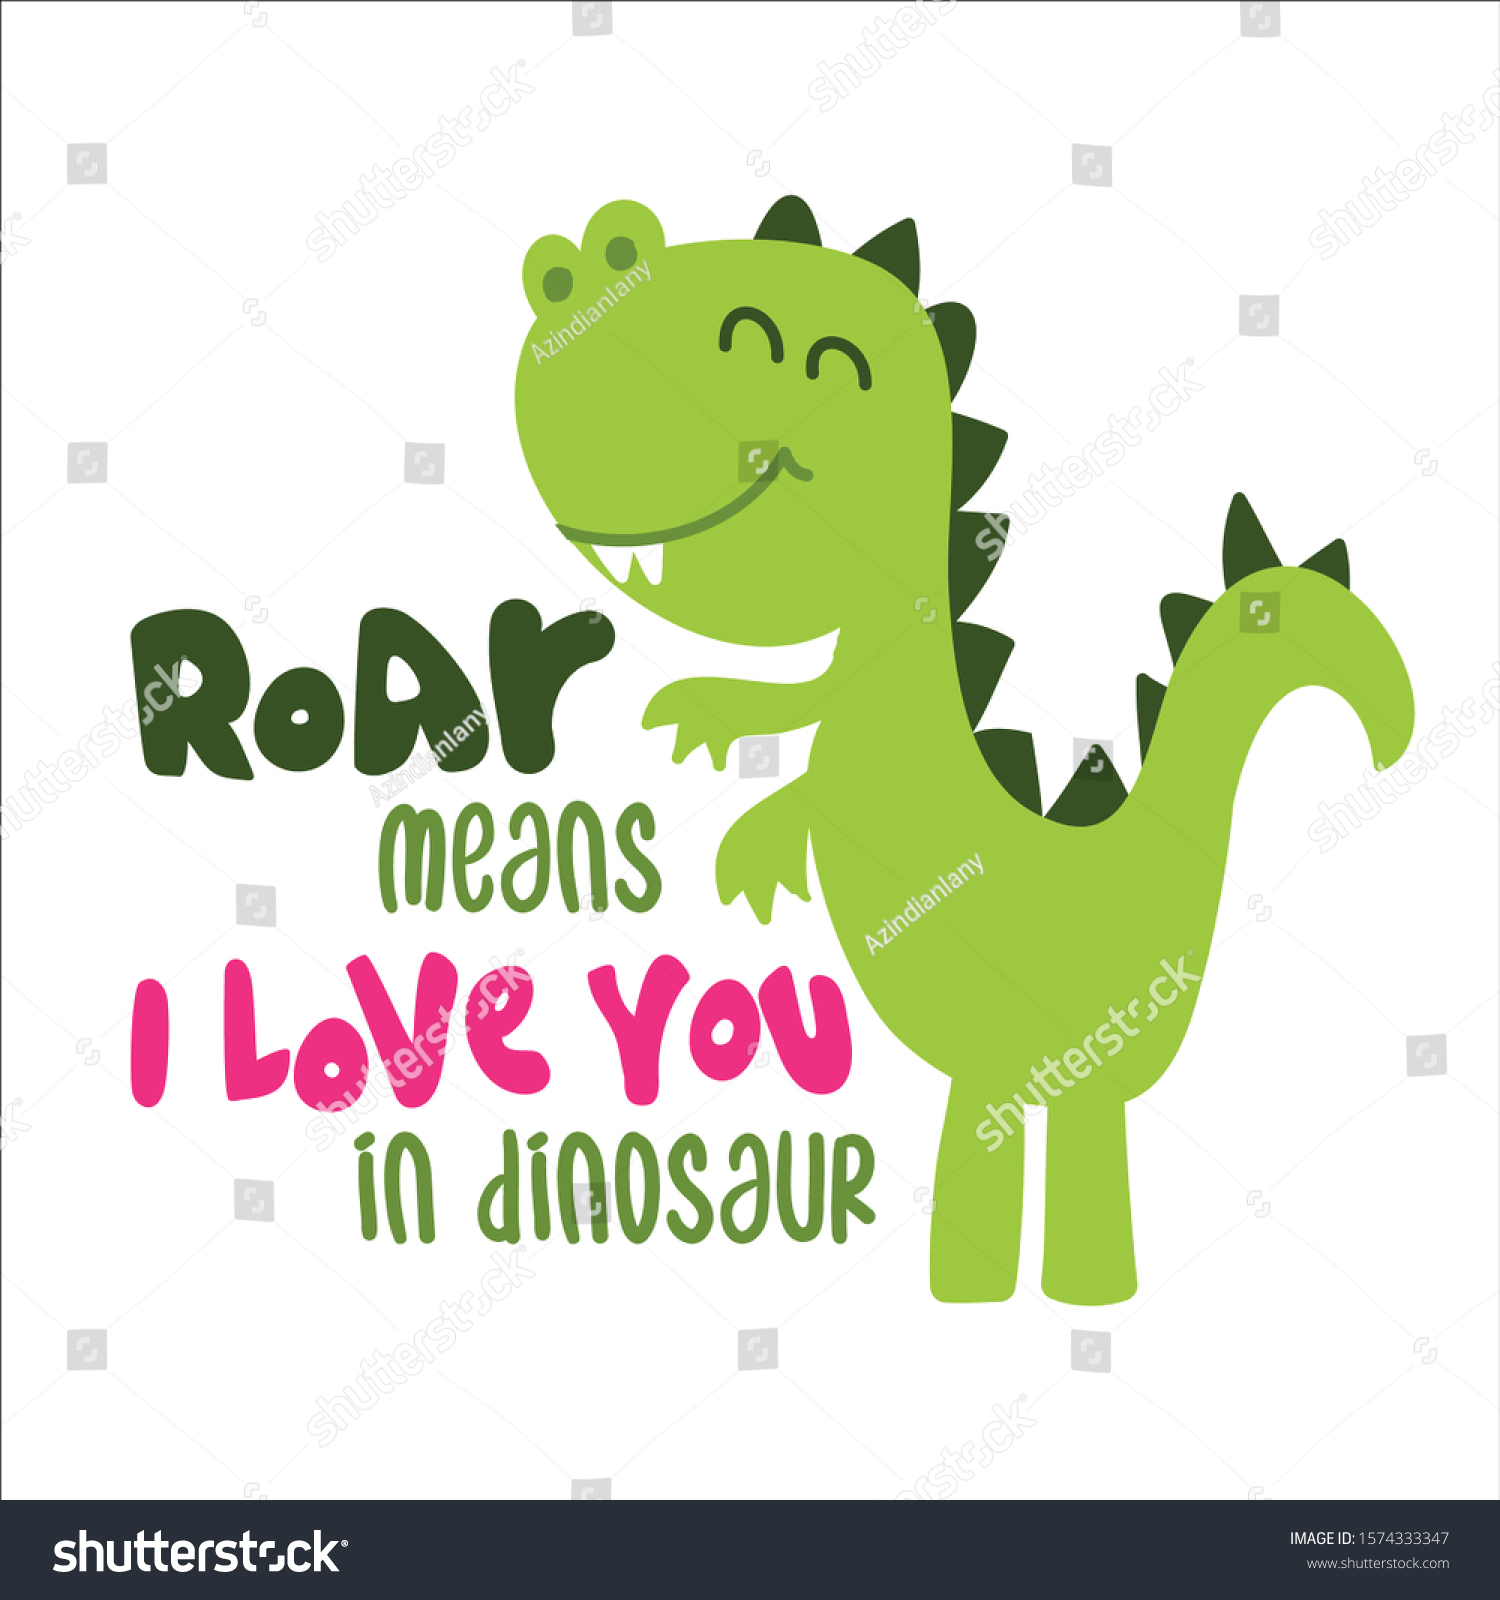 SVG of Roar means I love you in dinosaur - funny hand drawn doodle, cartoon dino. Good for Poster or t-shirt textile graphic design. Vector hand drawn illustration. svg